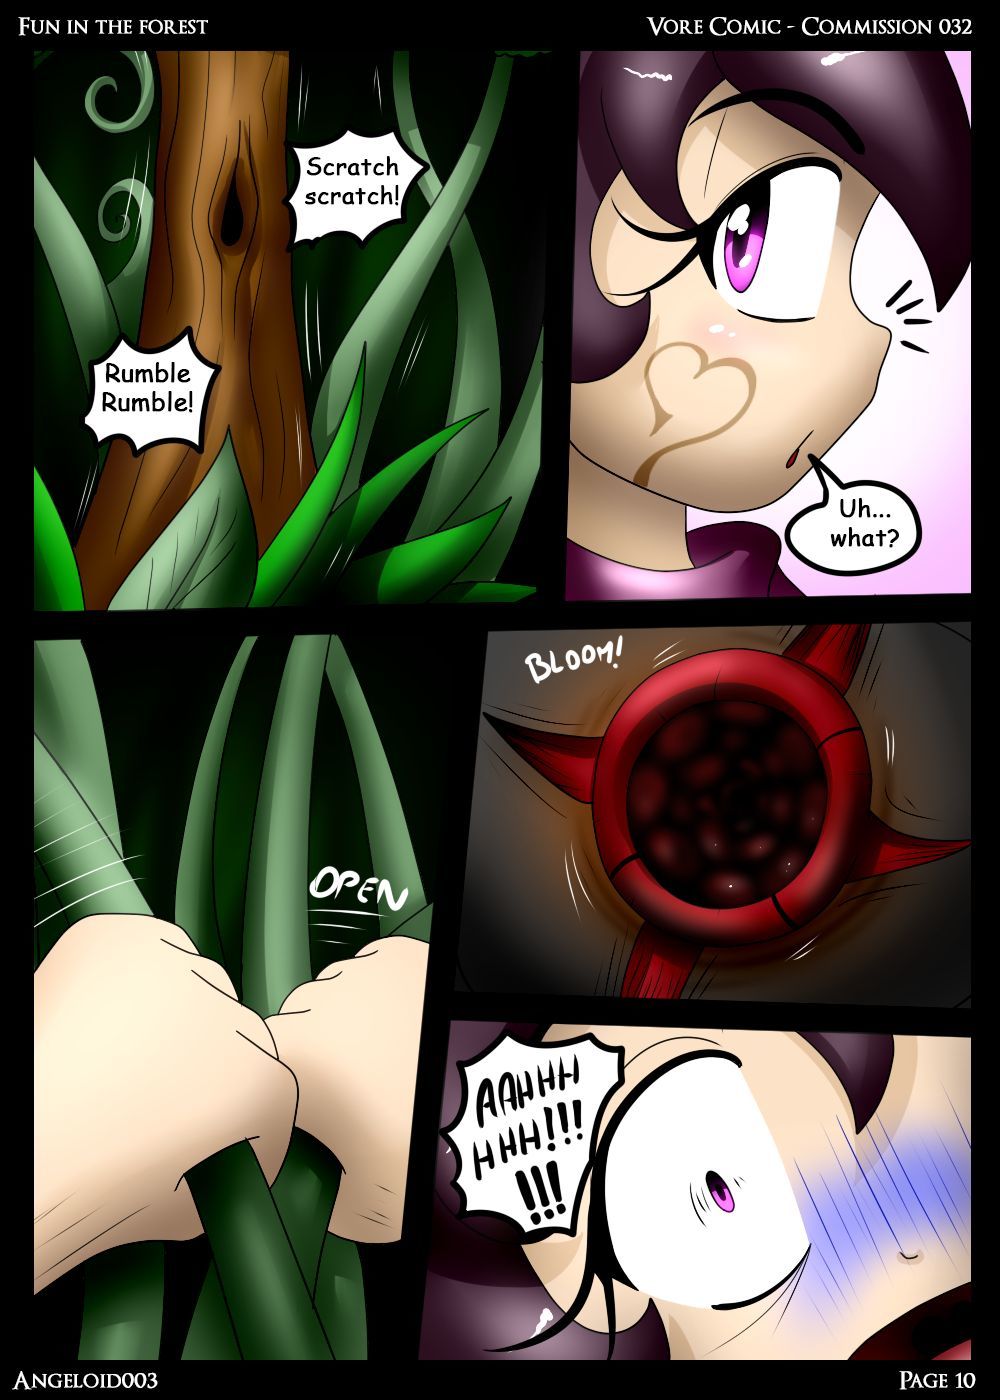 Fun in the Forest - Comm032 Angeloid003 page 10